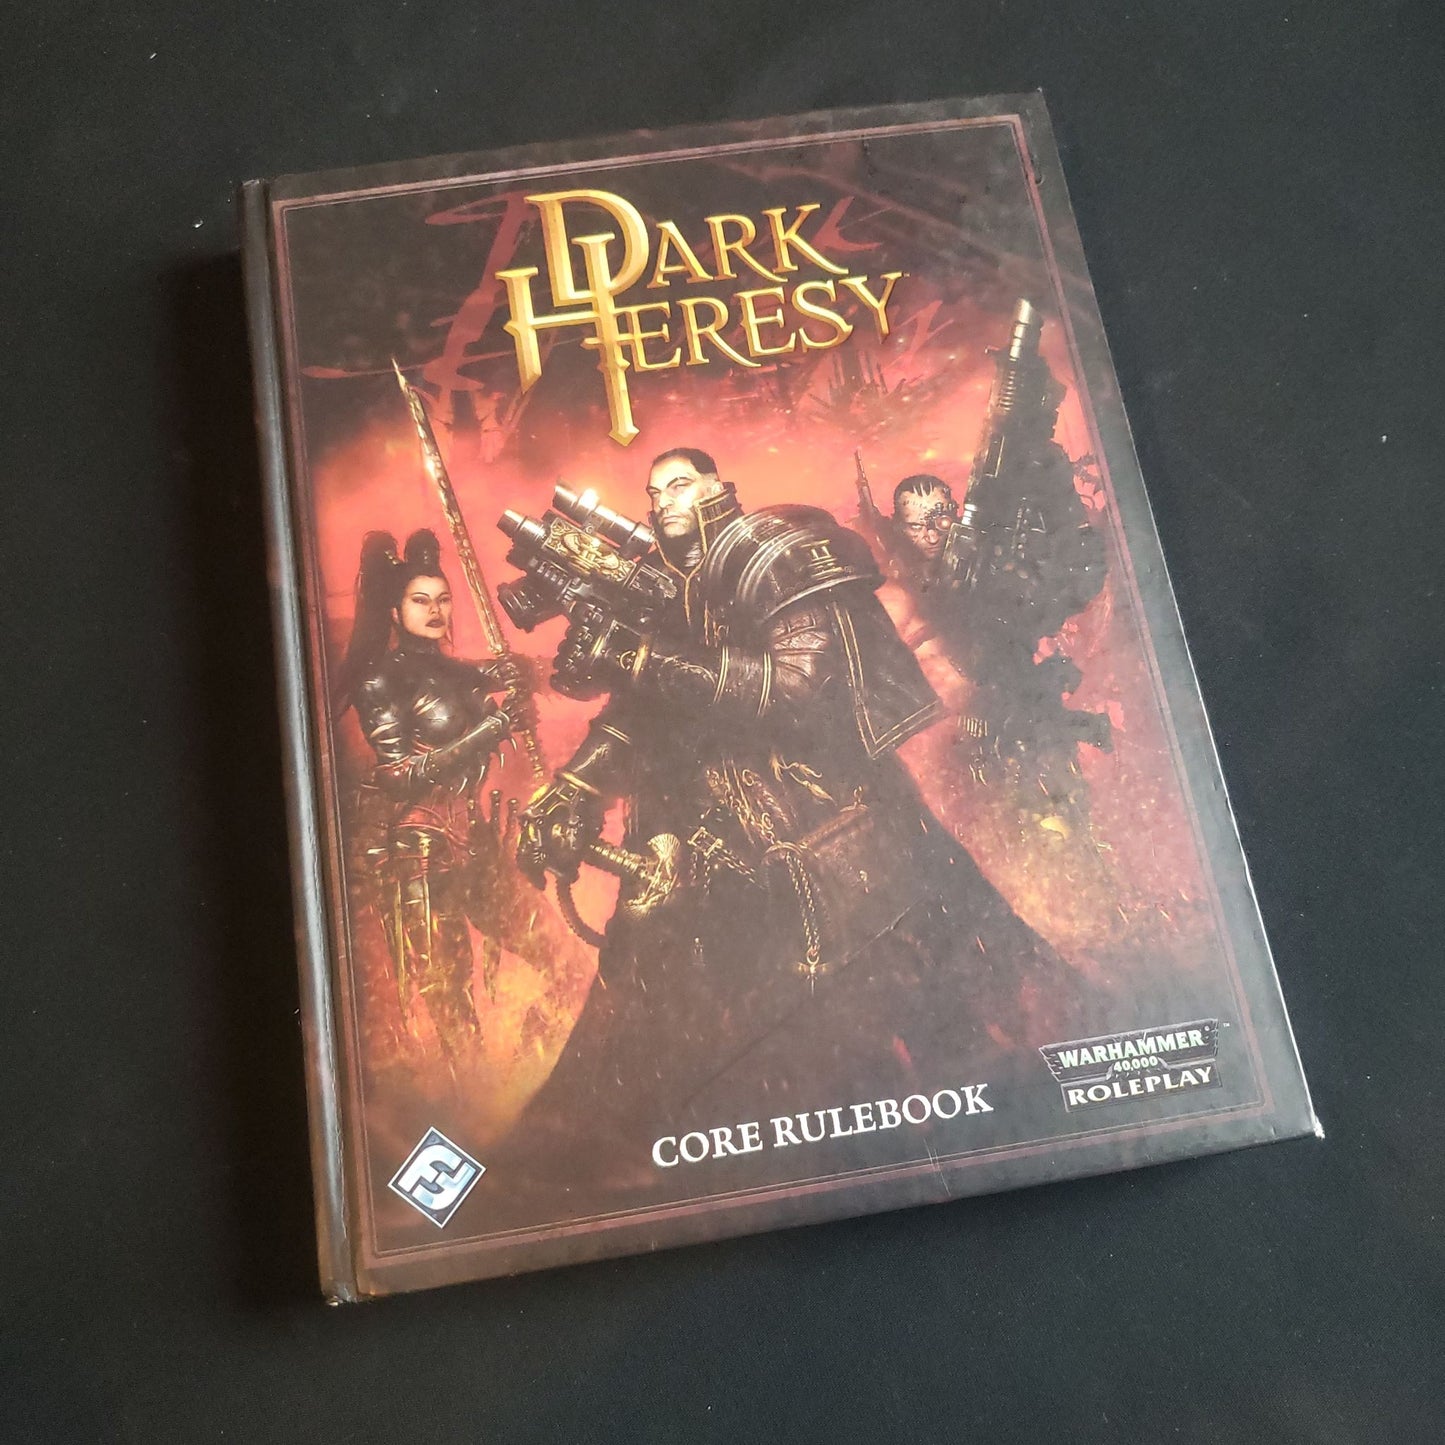 Front cover of the first edition core rulebook for the Dark Heresy roleplaying game